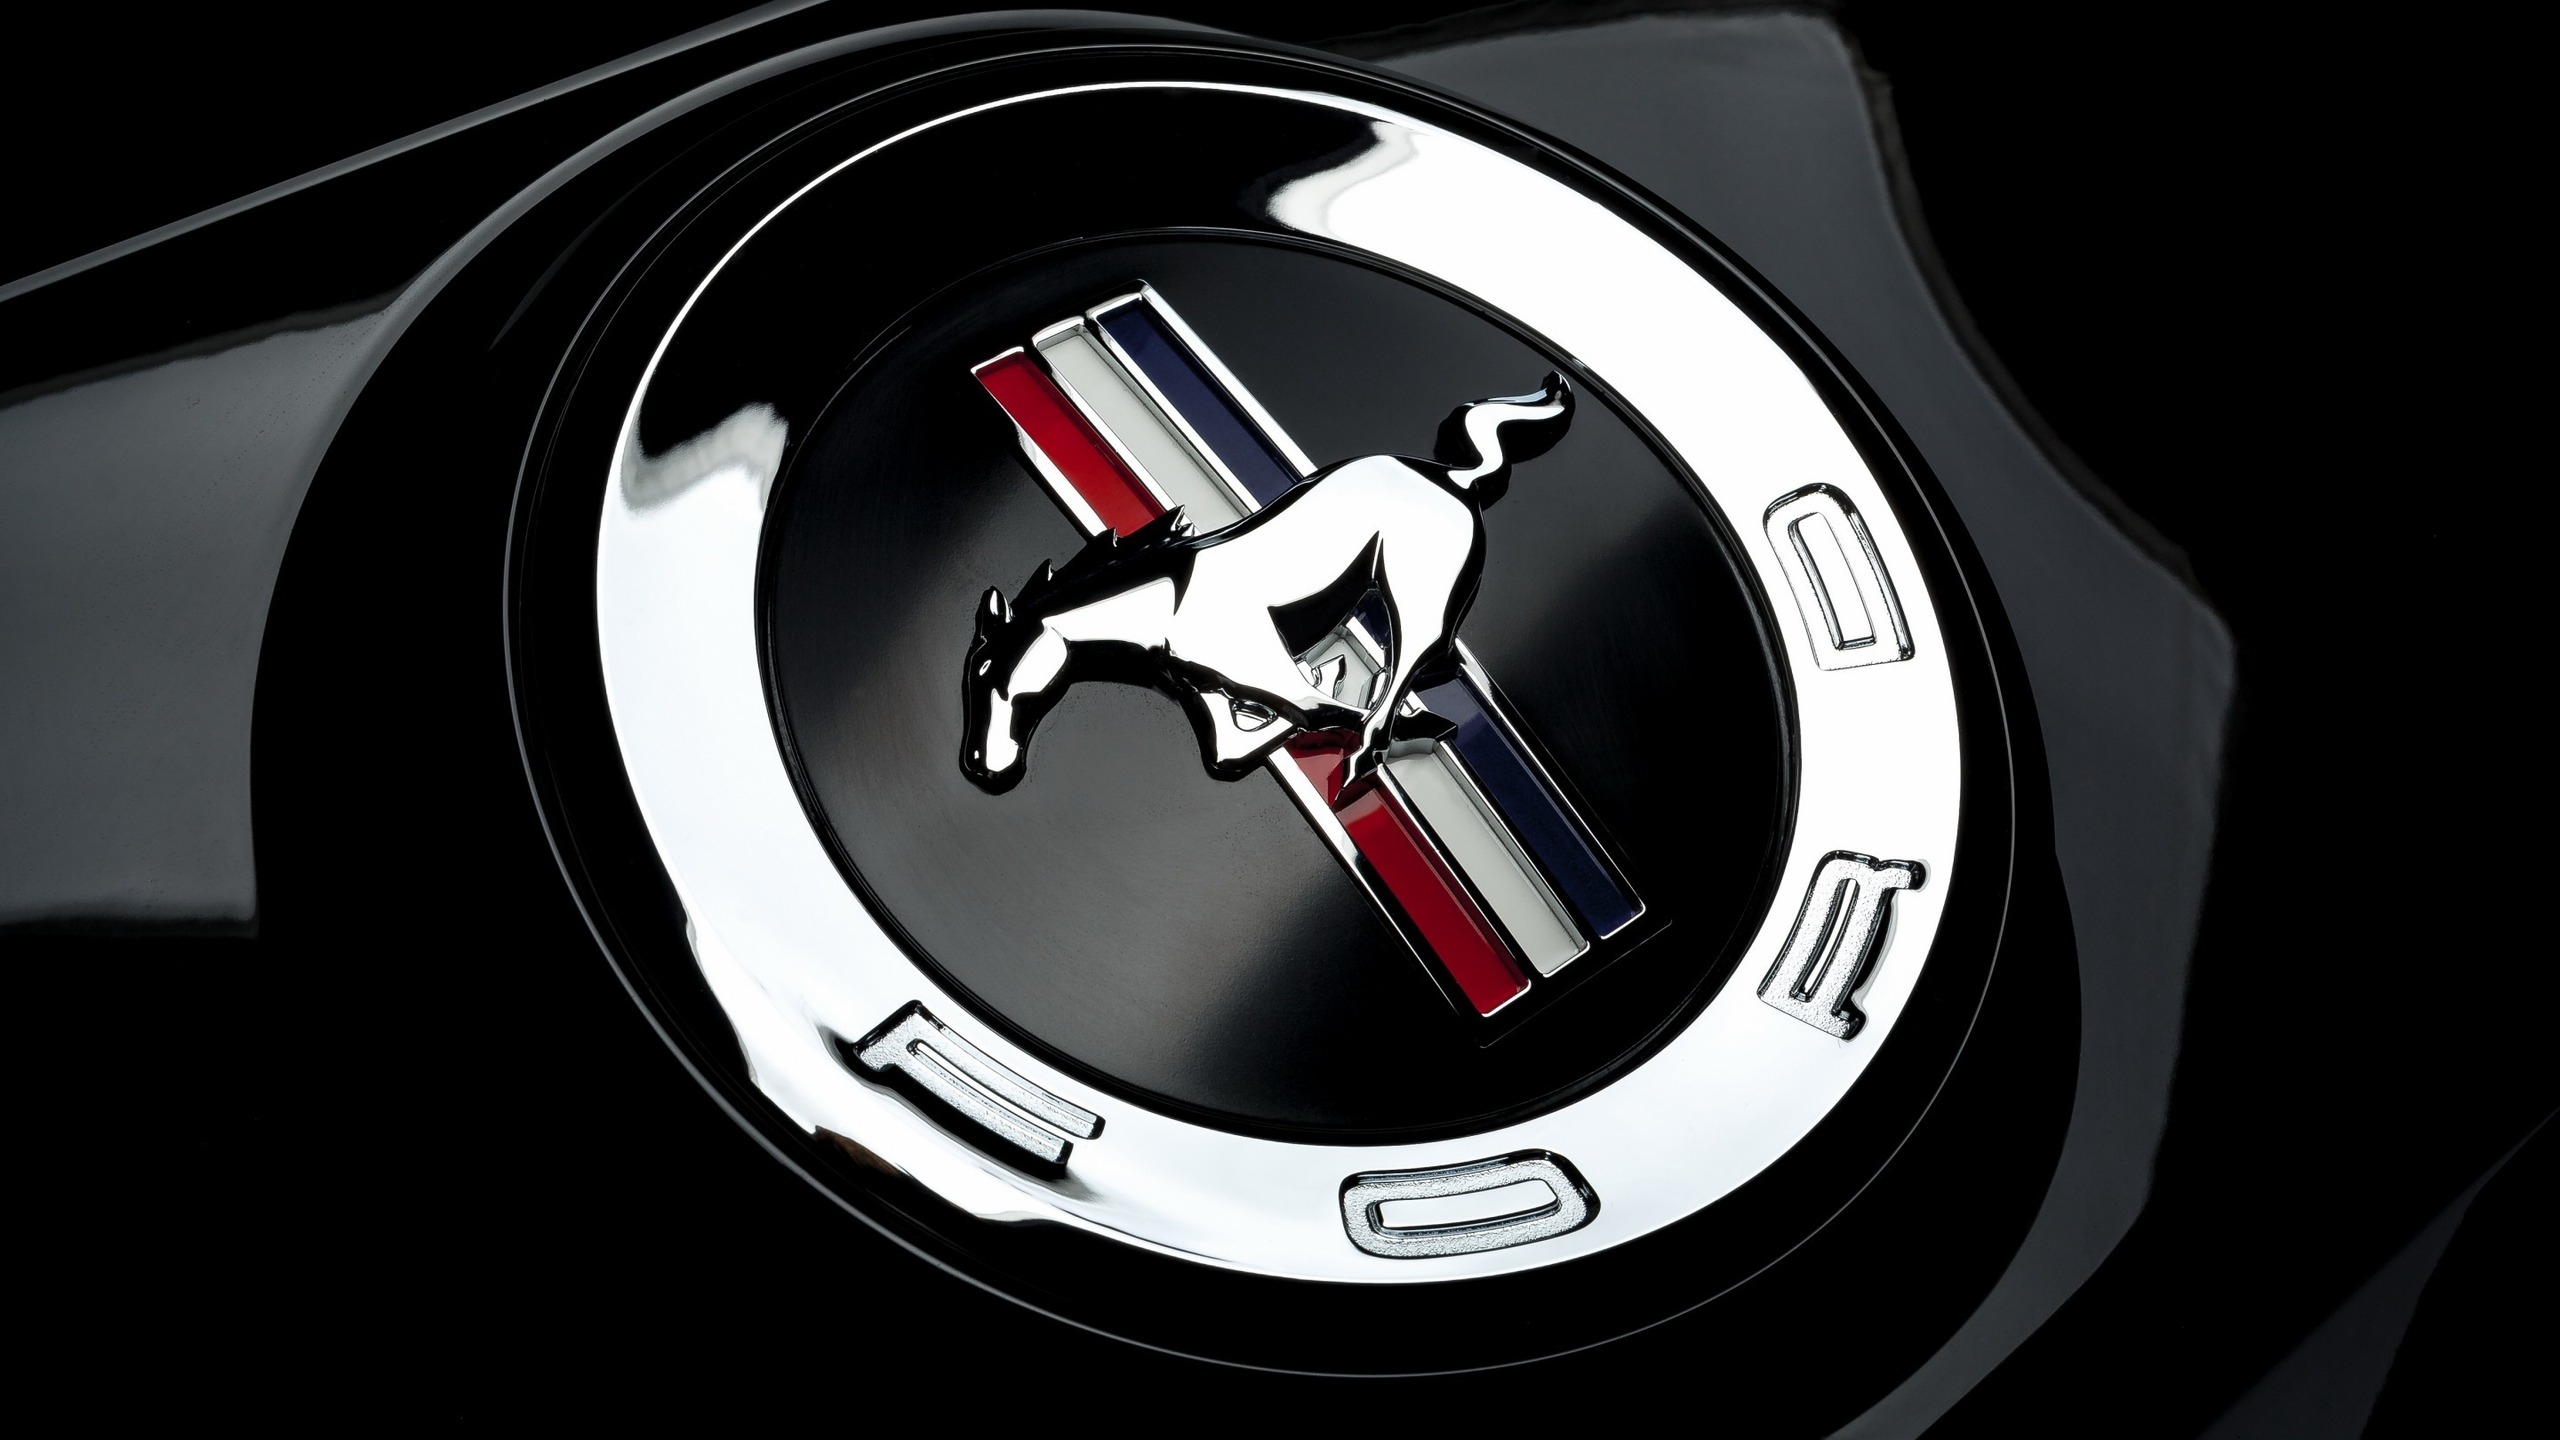 Ford Mustang Emblem for 2560x1440 HDTV resolution